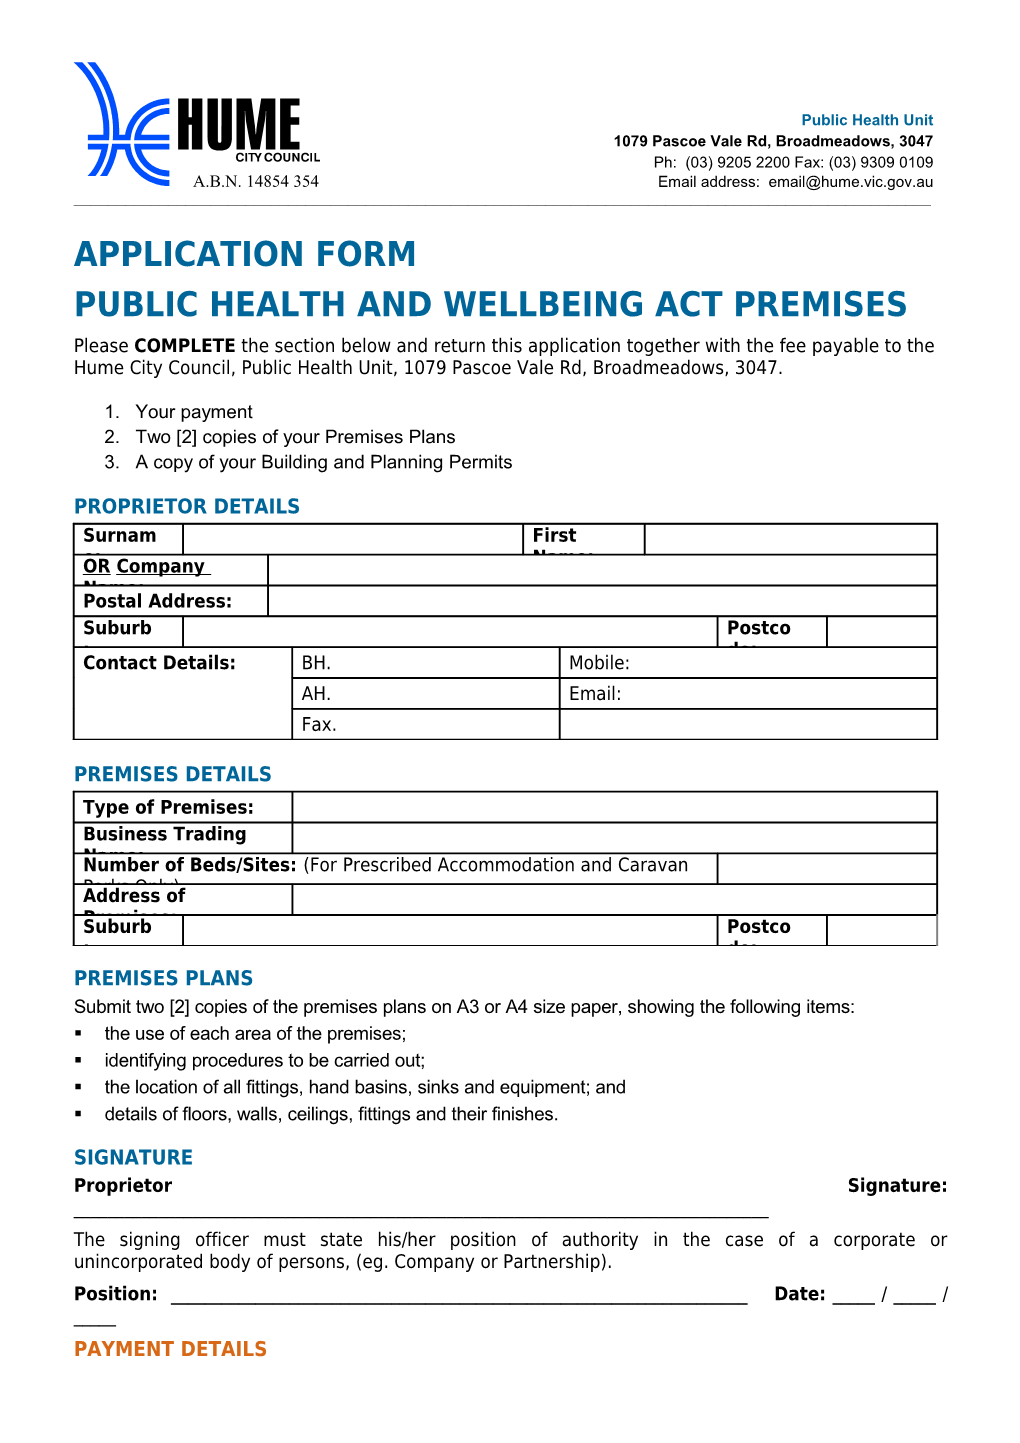 Public Health and Wellbeing Act Premises